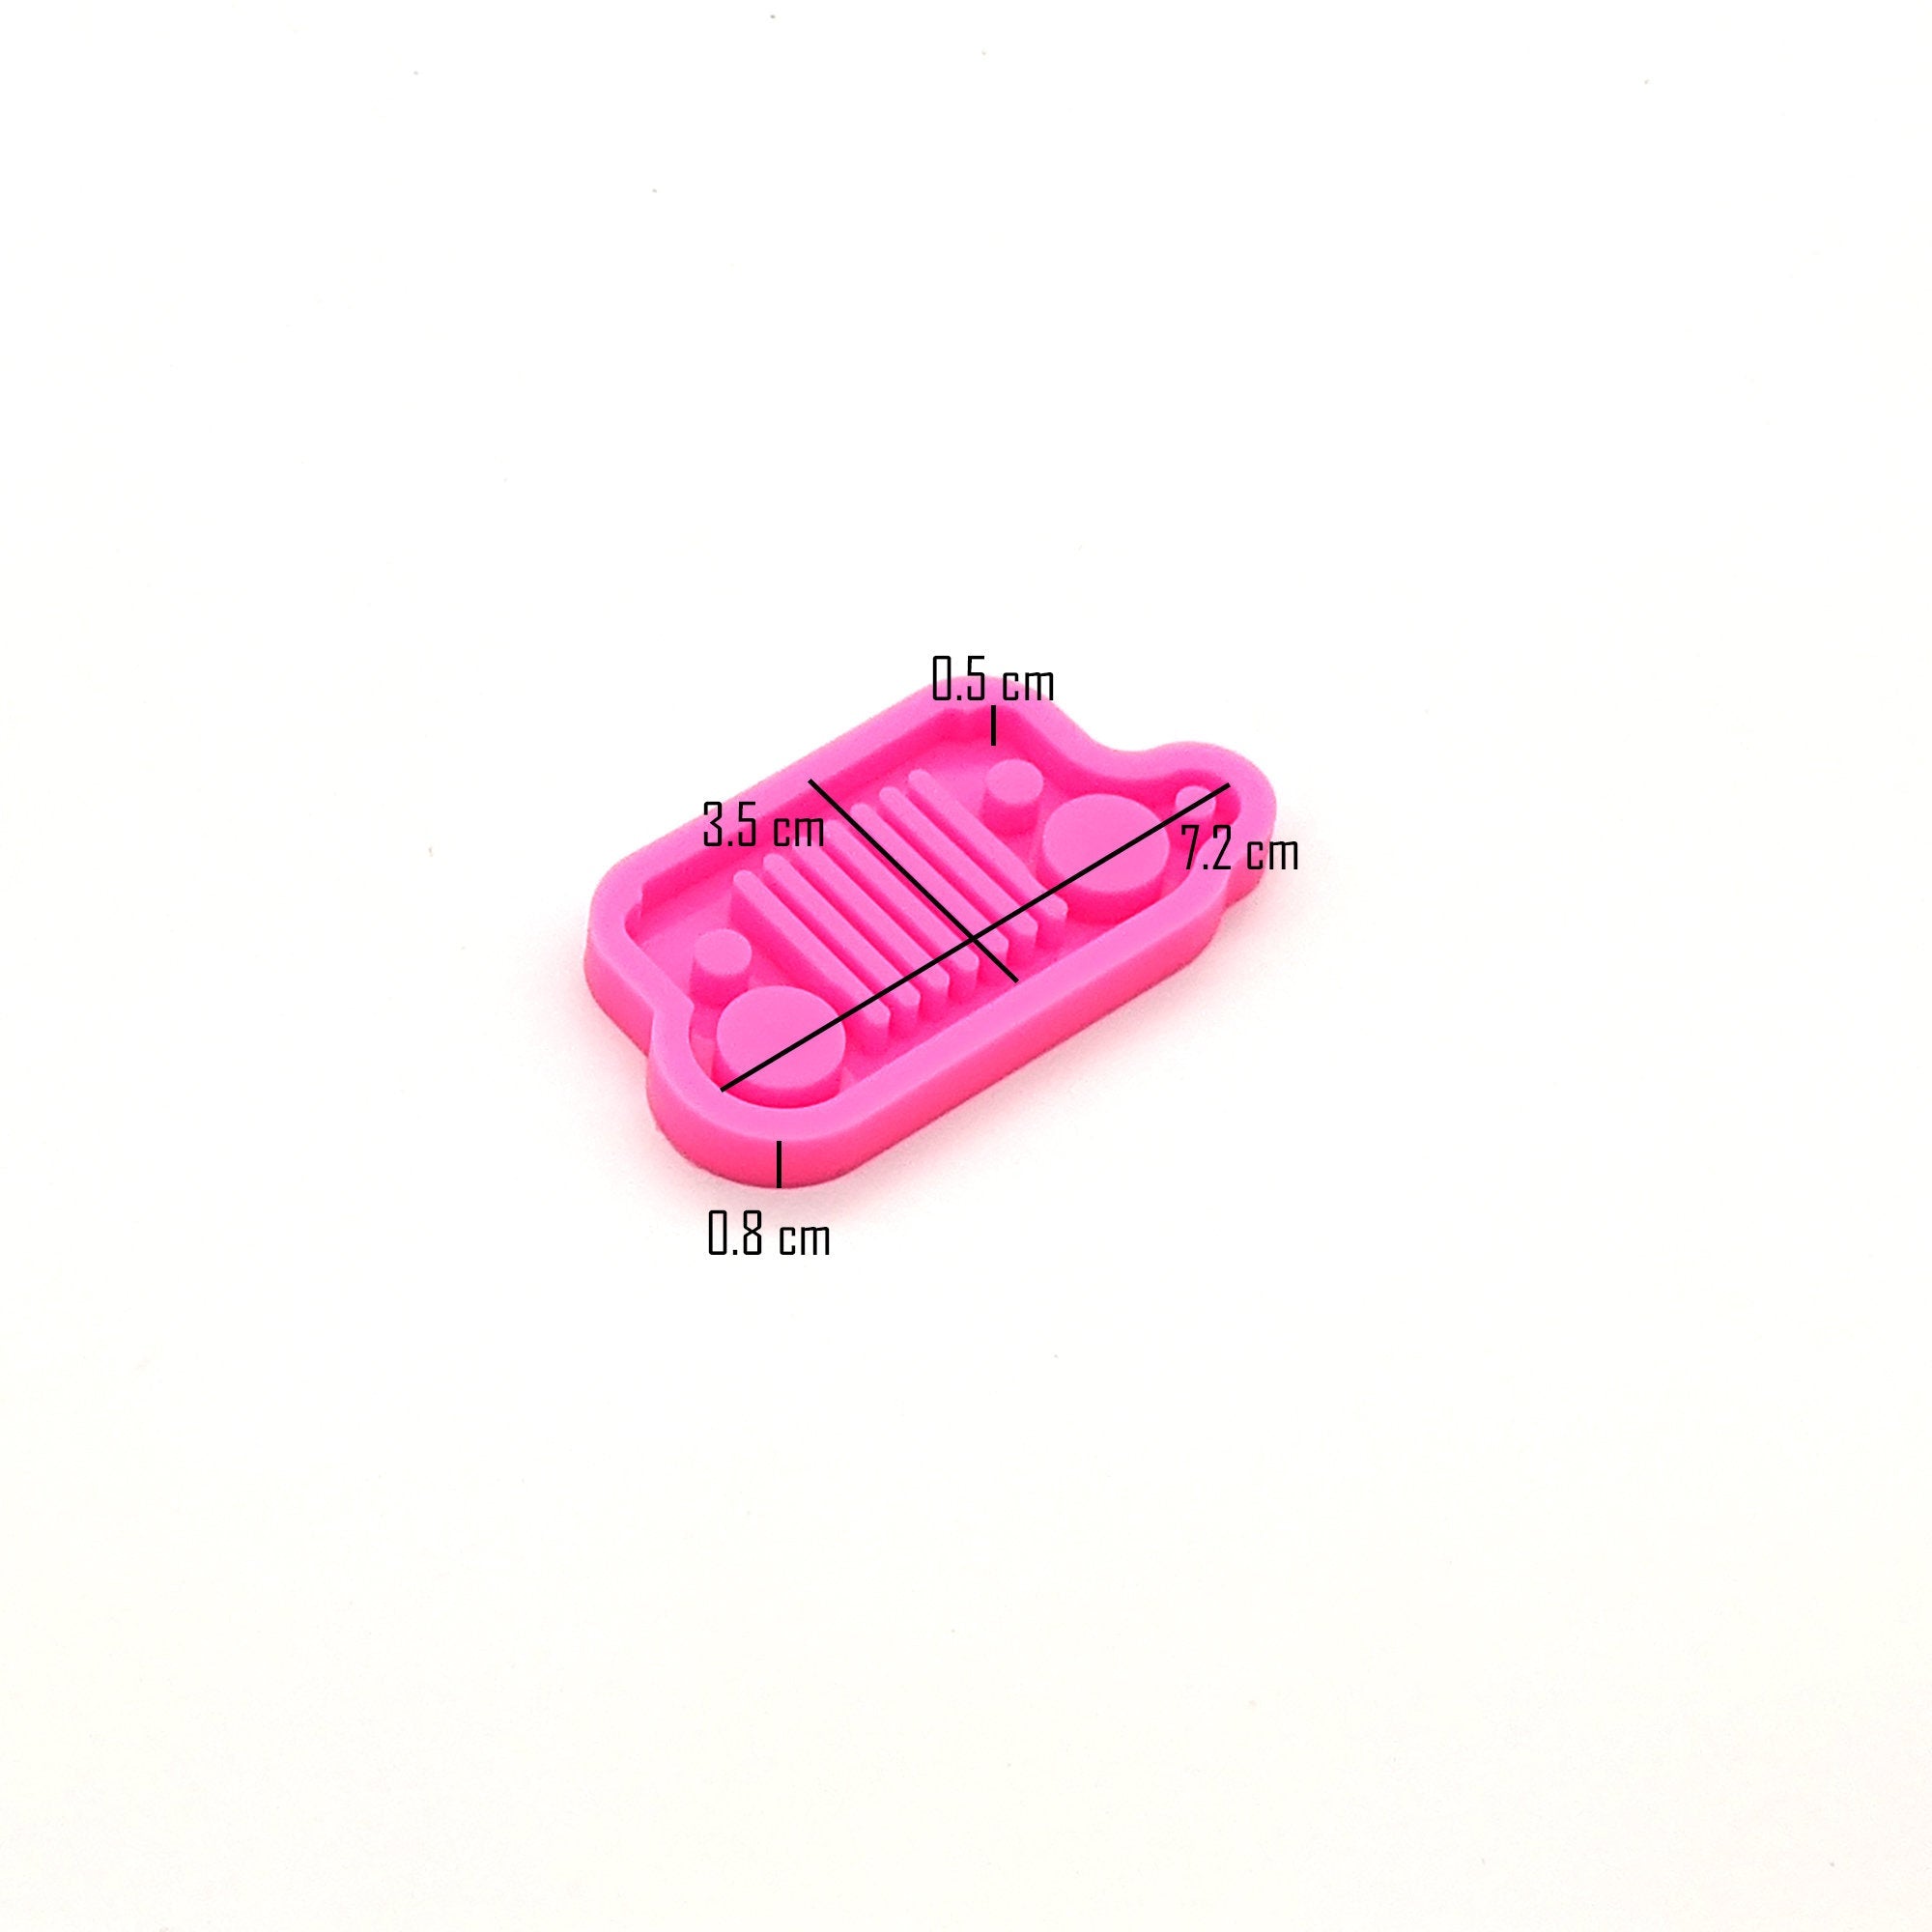 Jeep - Jeep Lights - Shiny Silicone Mold for Epoxy Resin Keychain - Jewelry Making - Ornament Silicone Mold